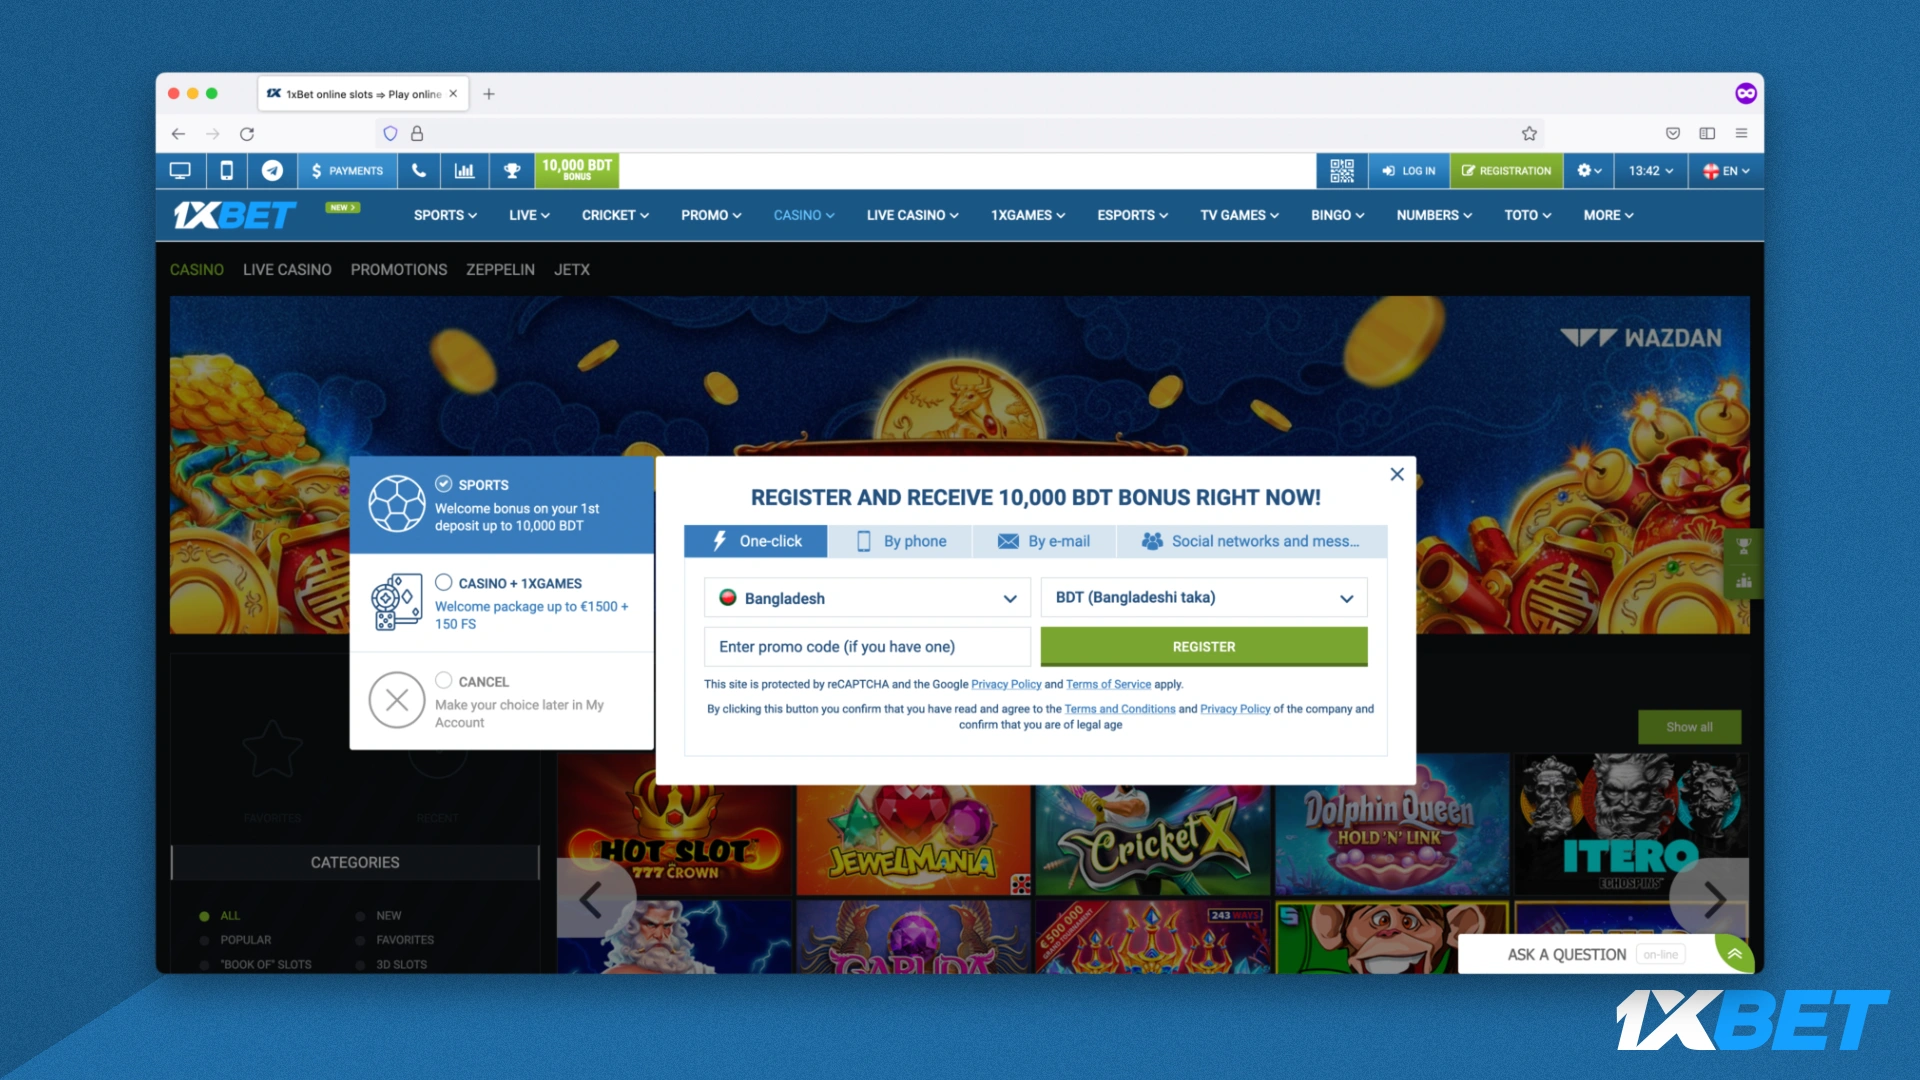 Before you can start the Bangladesh casino 1xBet you need to create your personal account